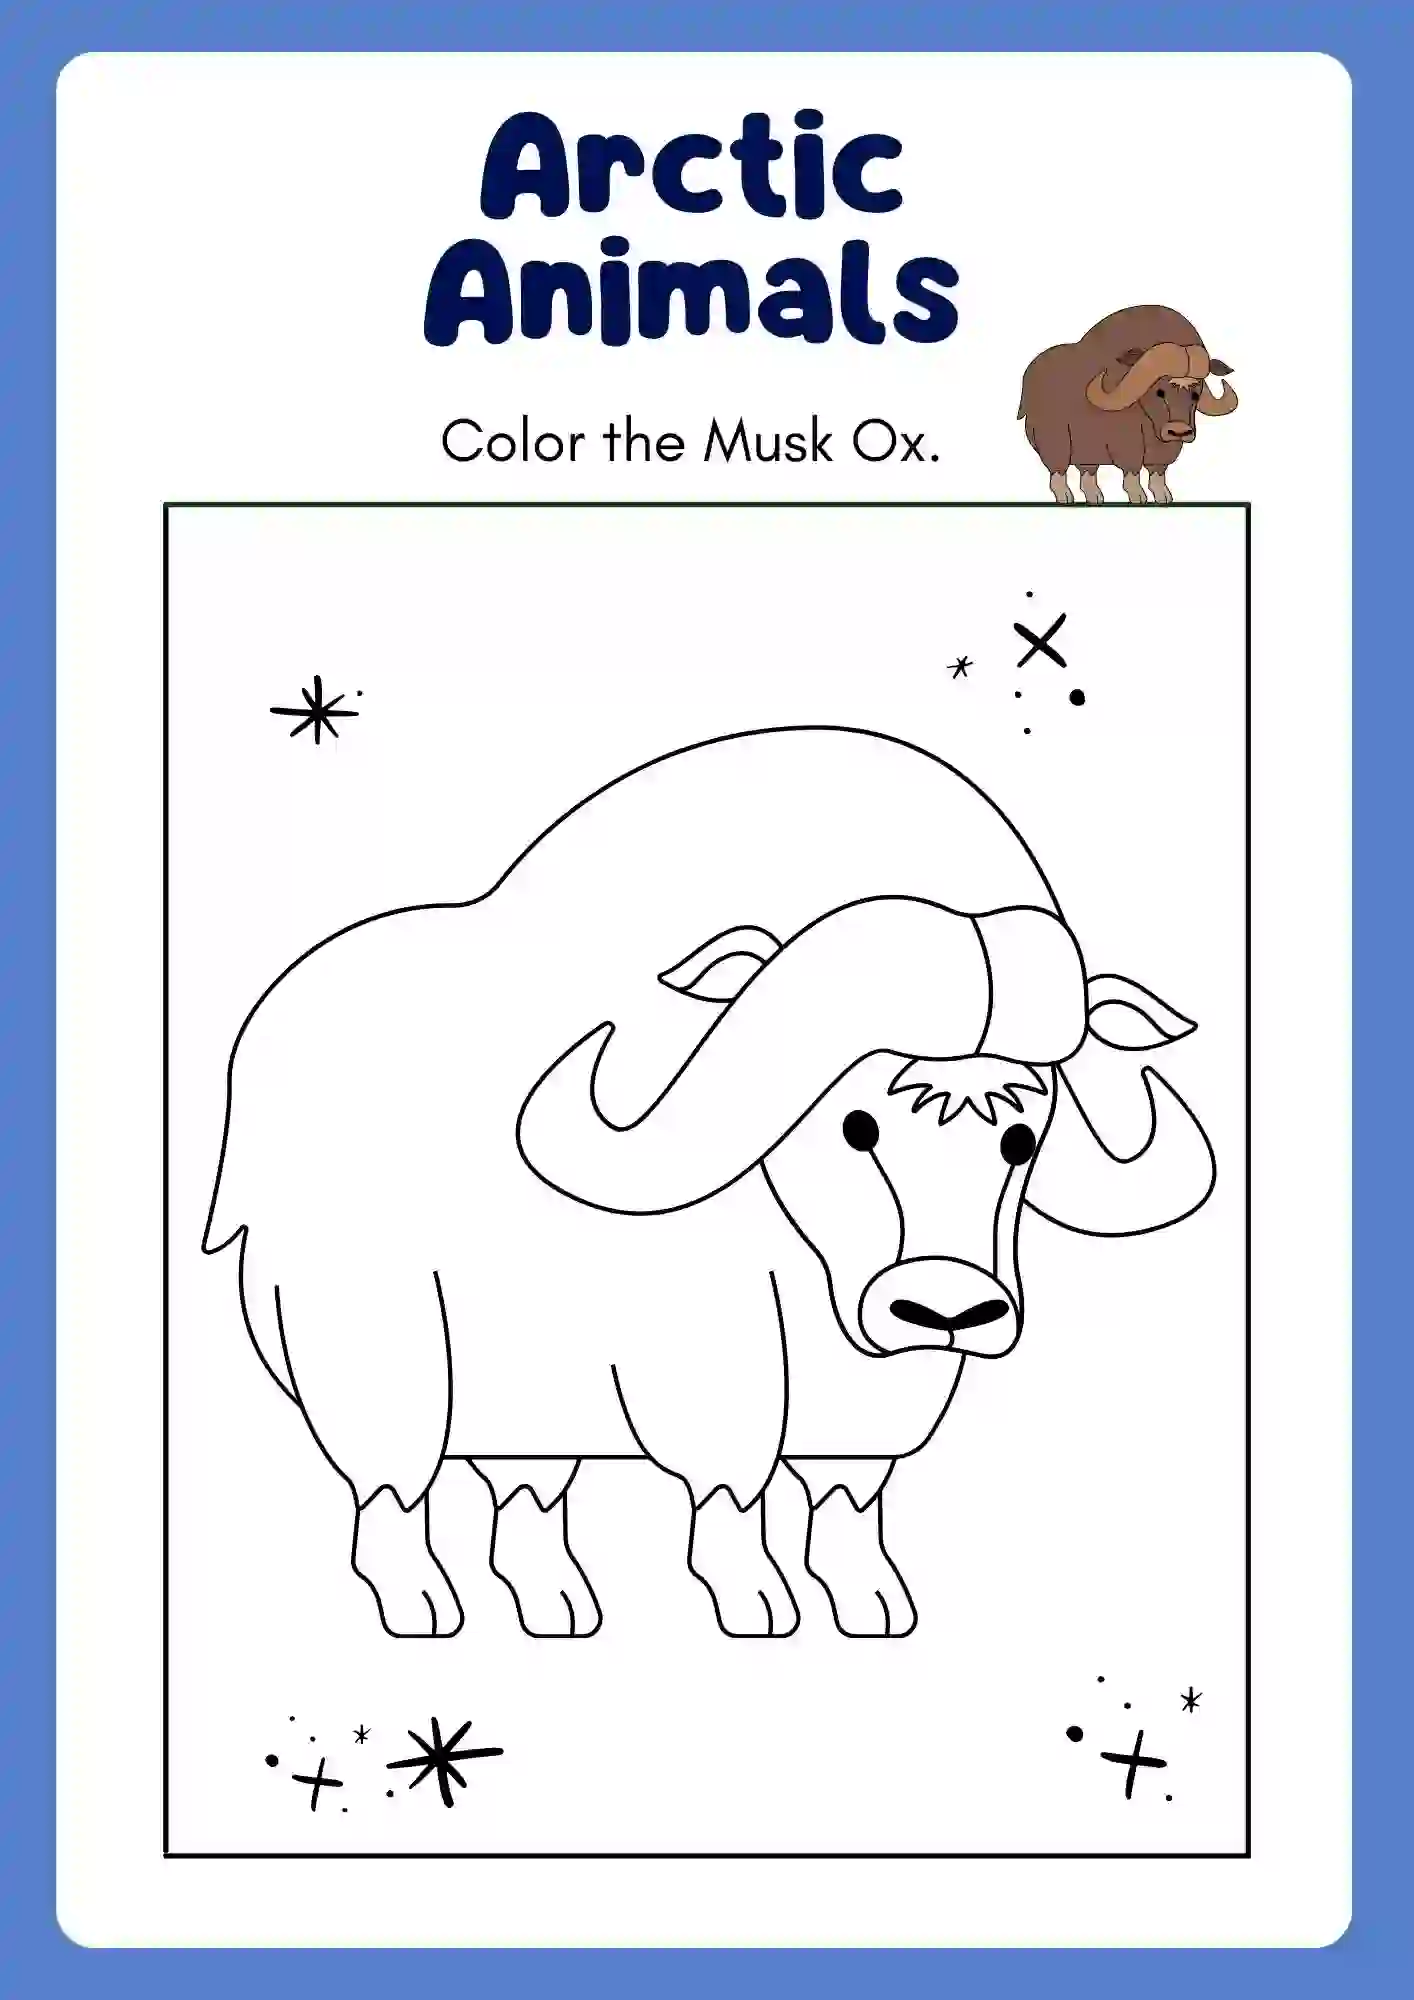 Arctic Animal Coloring Worksheets (OX)